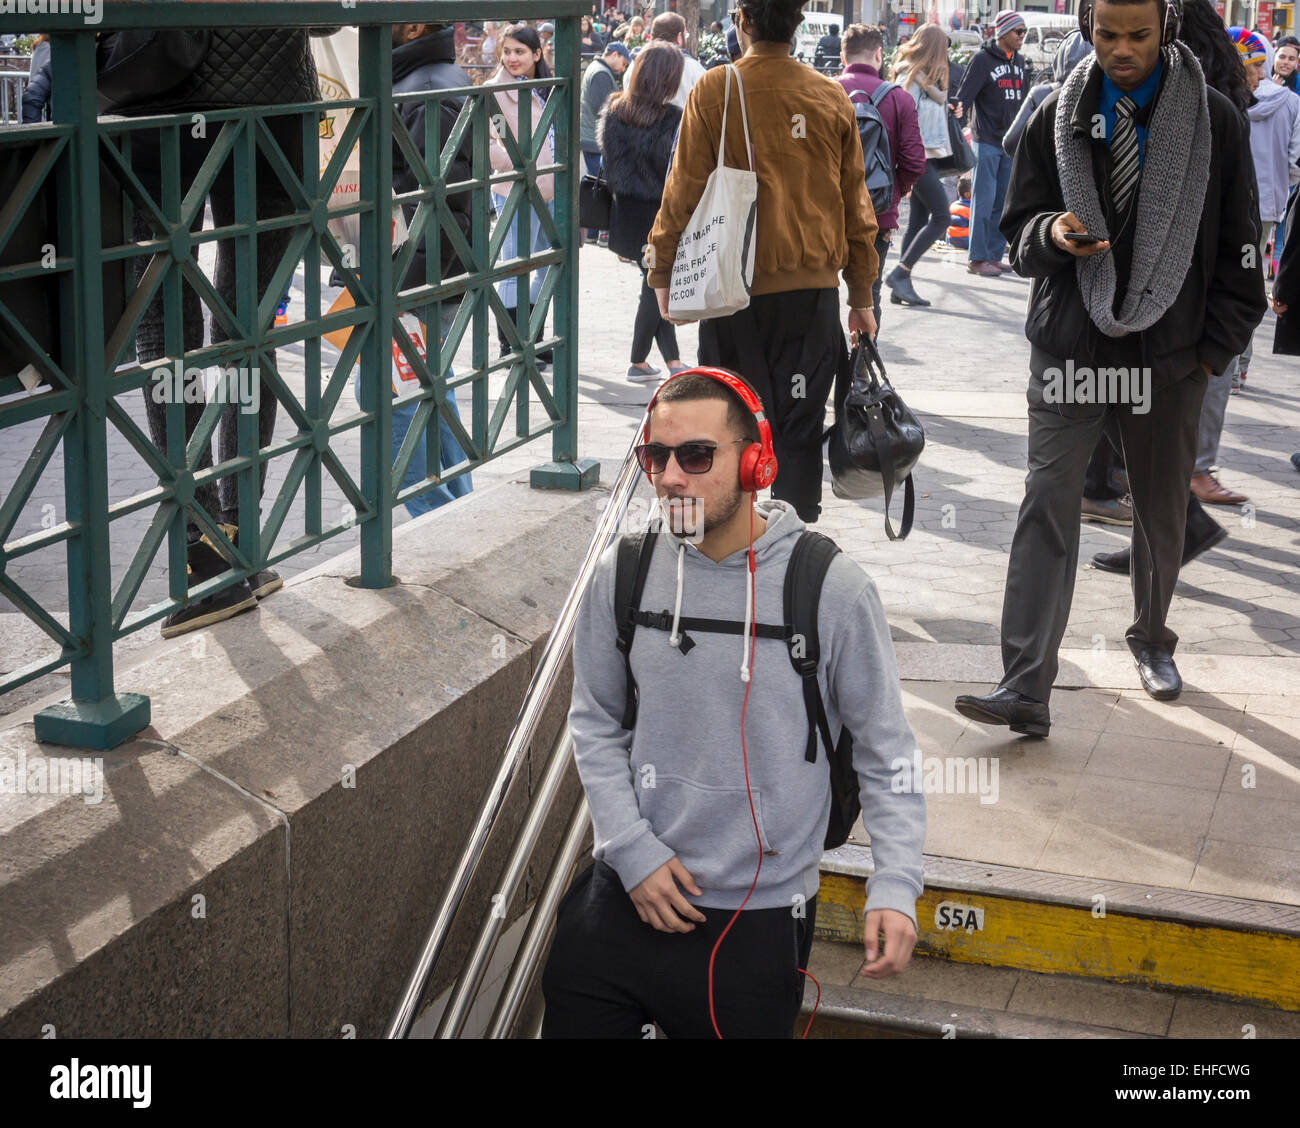 A music listener wears his Beats brand over the ear headphones as he enters the Union Square subway station in New York on Wednesday, March 11, 2015 (© Richard B. Levine) Stock Photo